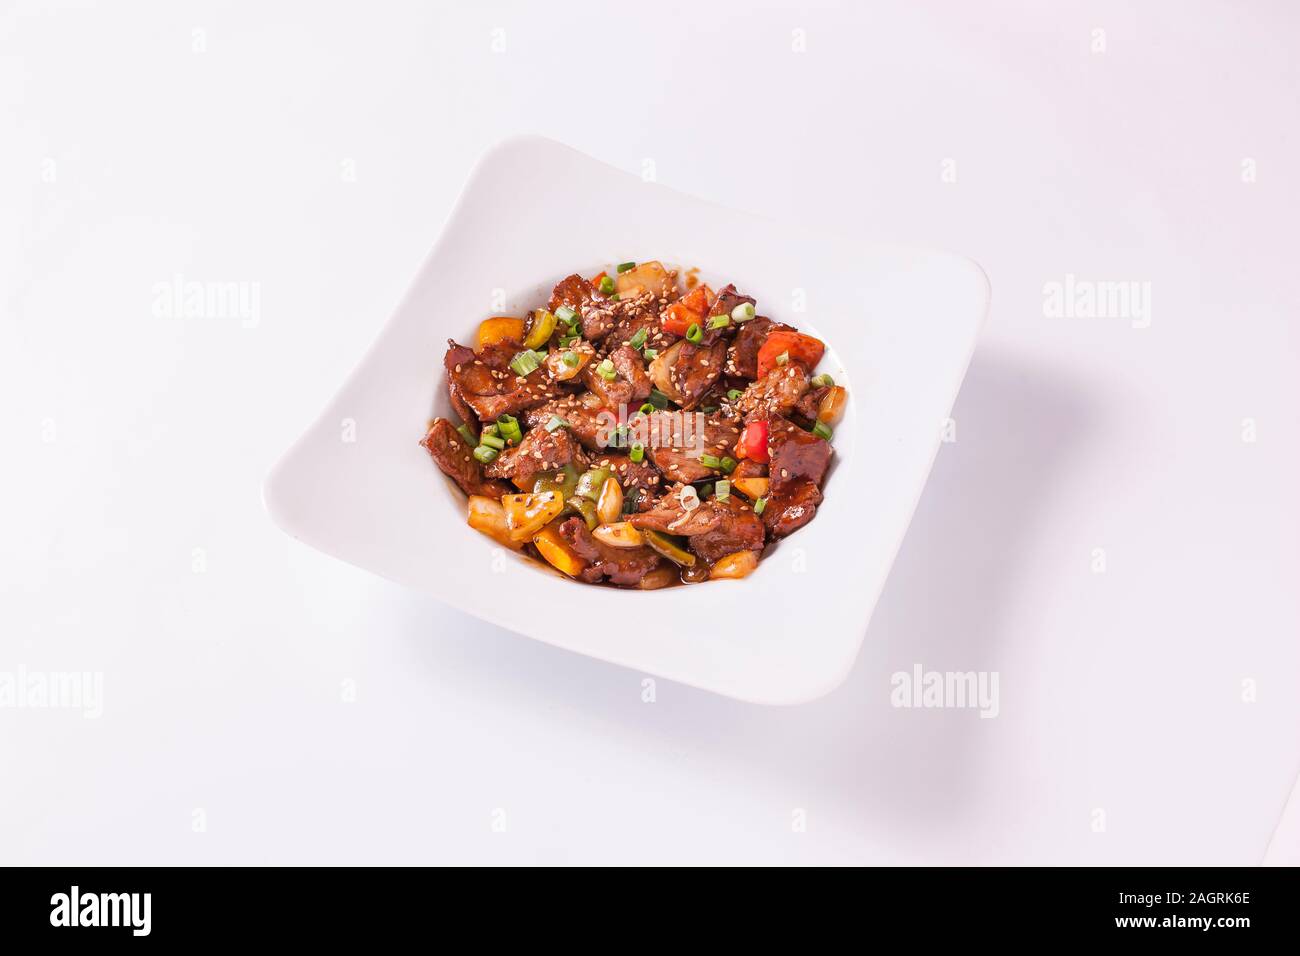 Asian Food Meat and Vegetables Stock Photo